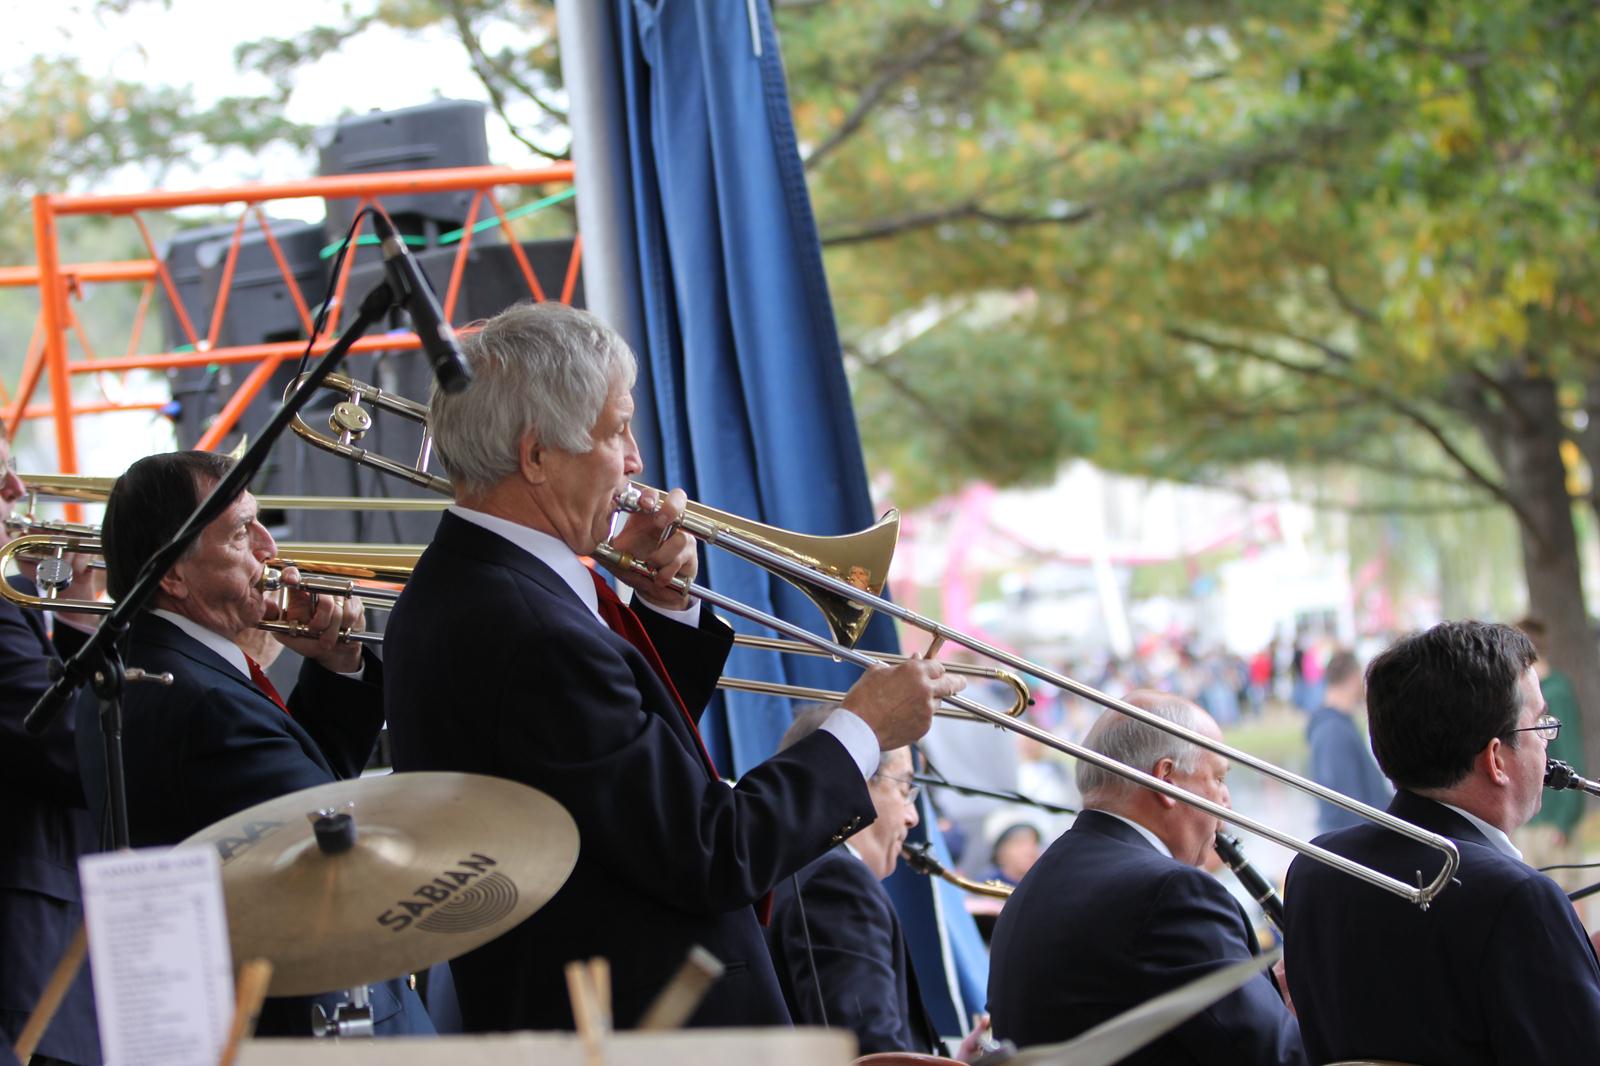 The Trombone Section Playing a Soli. Bob Trudeau and Dick Auger in the Foreground